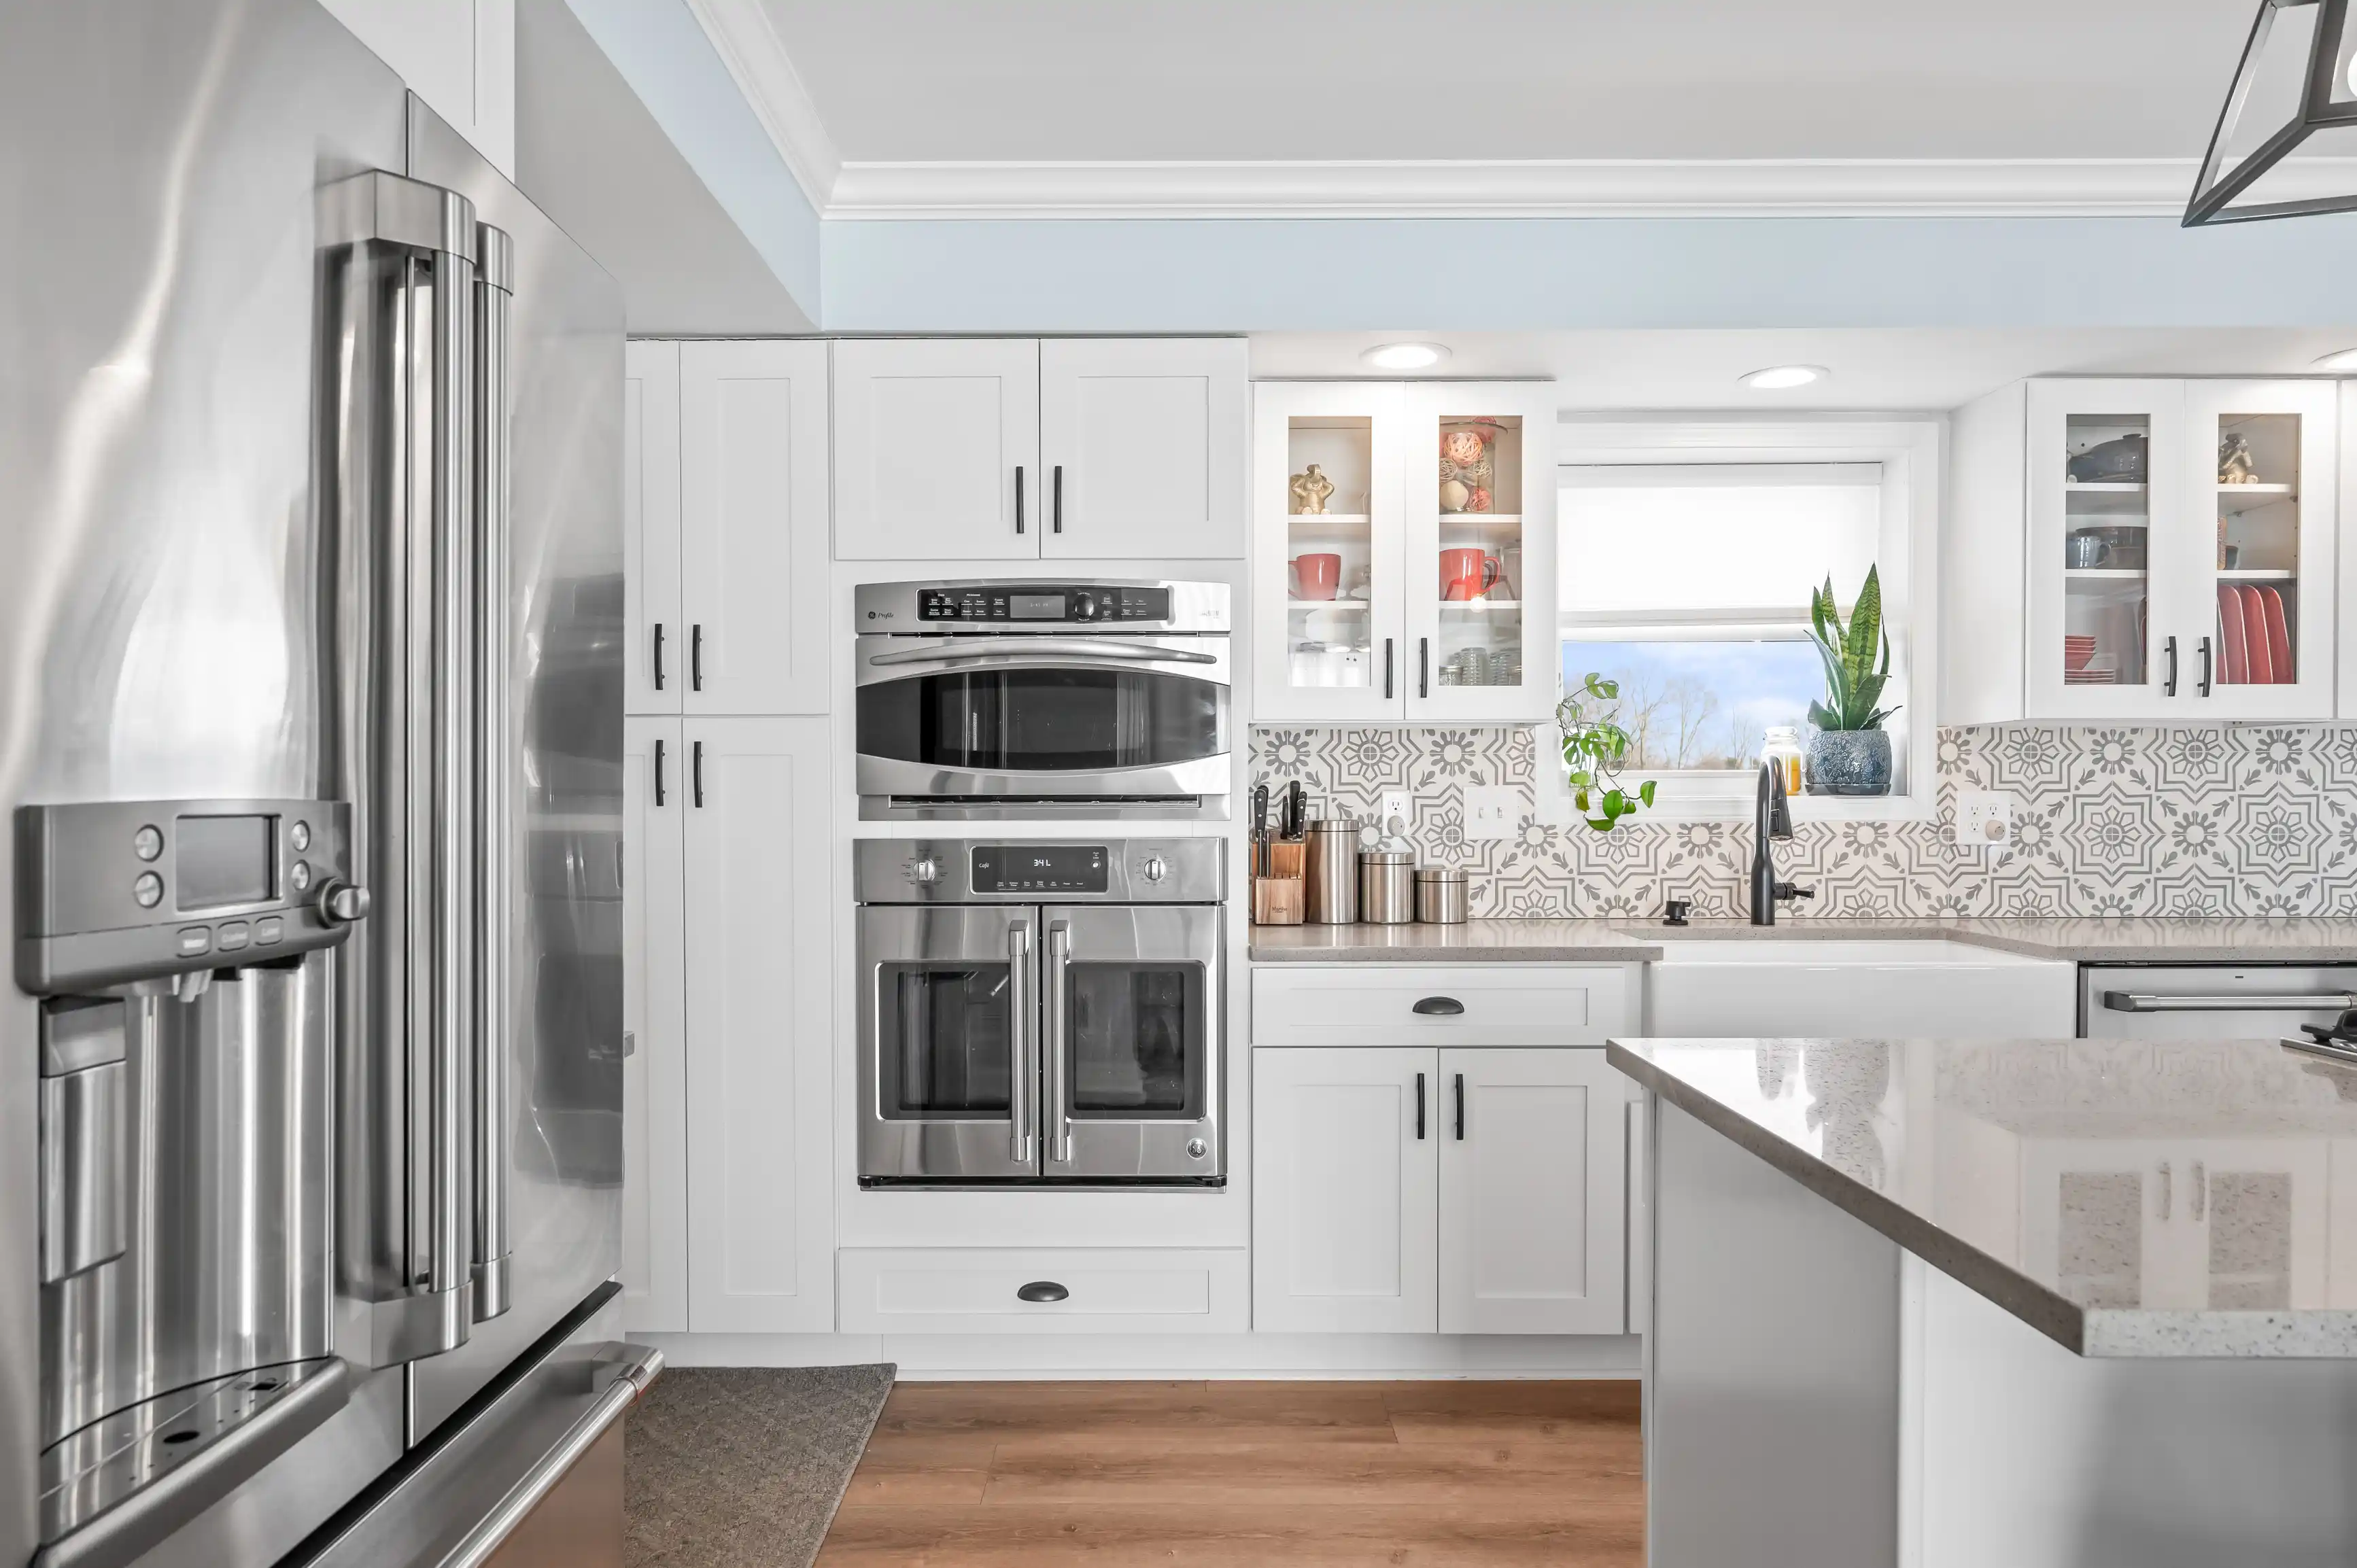 Modern kitchen interior with white cabinets, stainless steel appliances, patterned backsplash, and hardwood flooring.